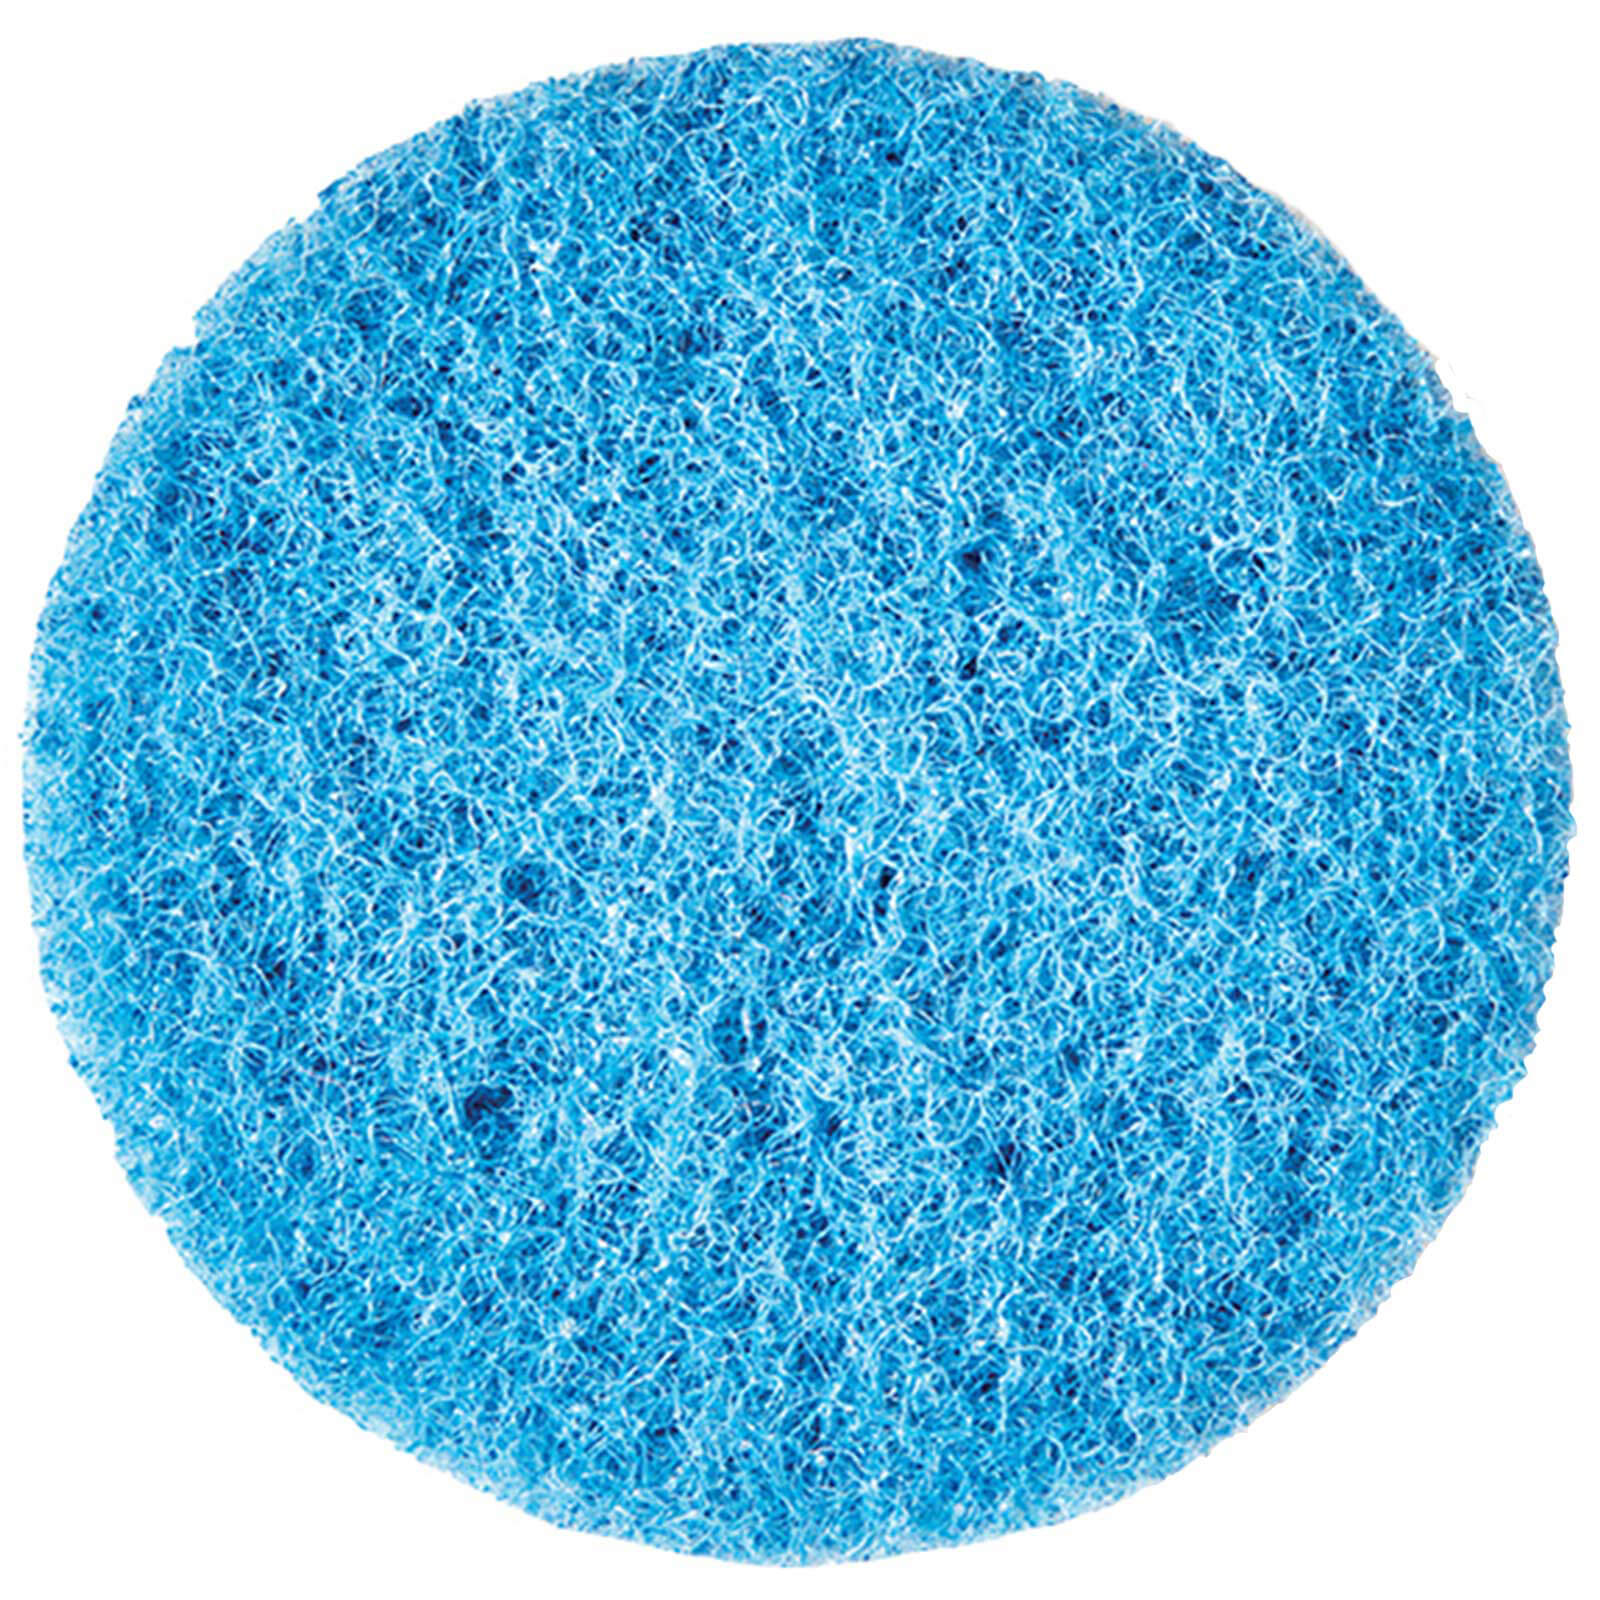 Photos - Other household chemicals Dremel Versa Non Scratch Cleaning Pads Pack of 3 2615P363JA 